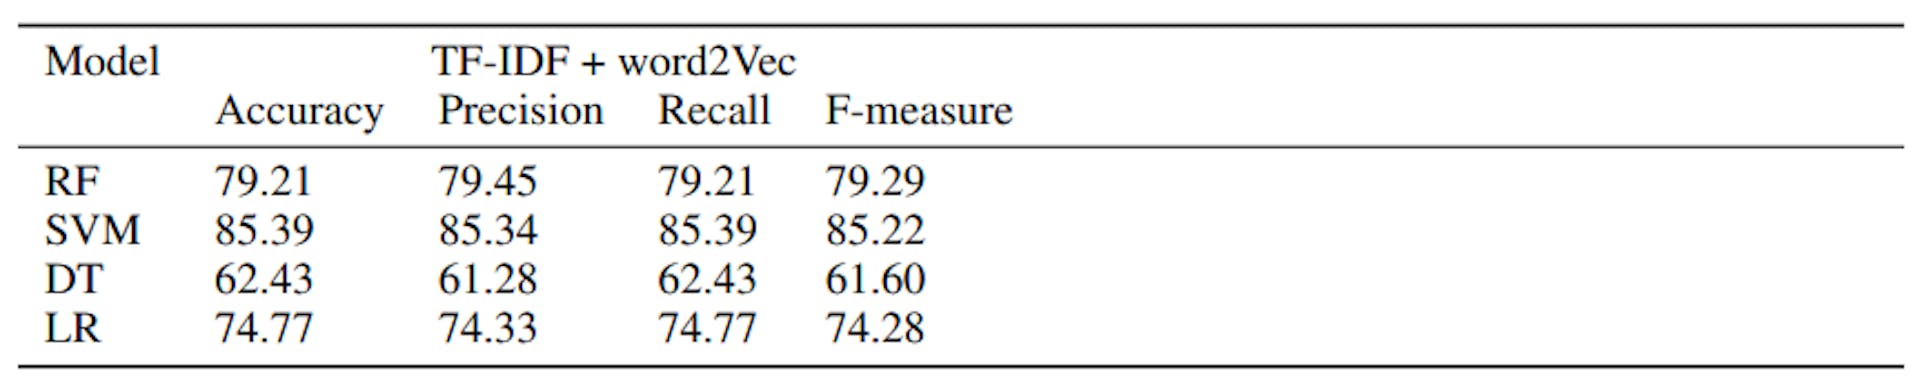 Table 6: Precision, Recall, Accuracy, and F-Measure values for TF-IDF + word2Vec